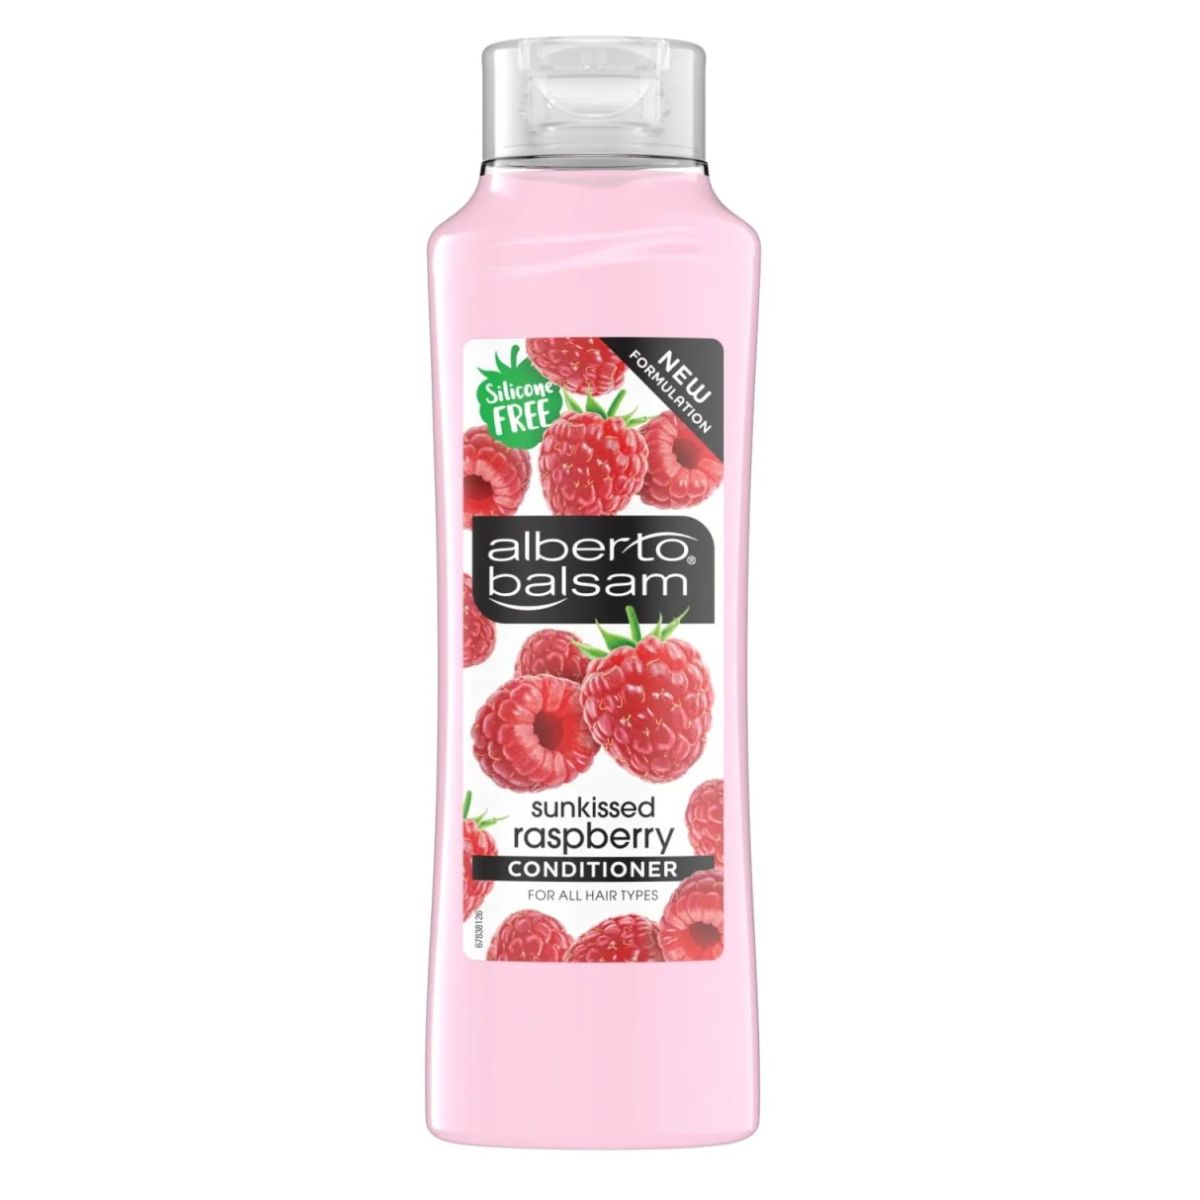 A bottle of Alberto Balsam - Conditioner - 350ml, labeled "silicone free" with images of raspberries, suitable for all hair types.